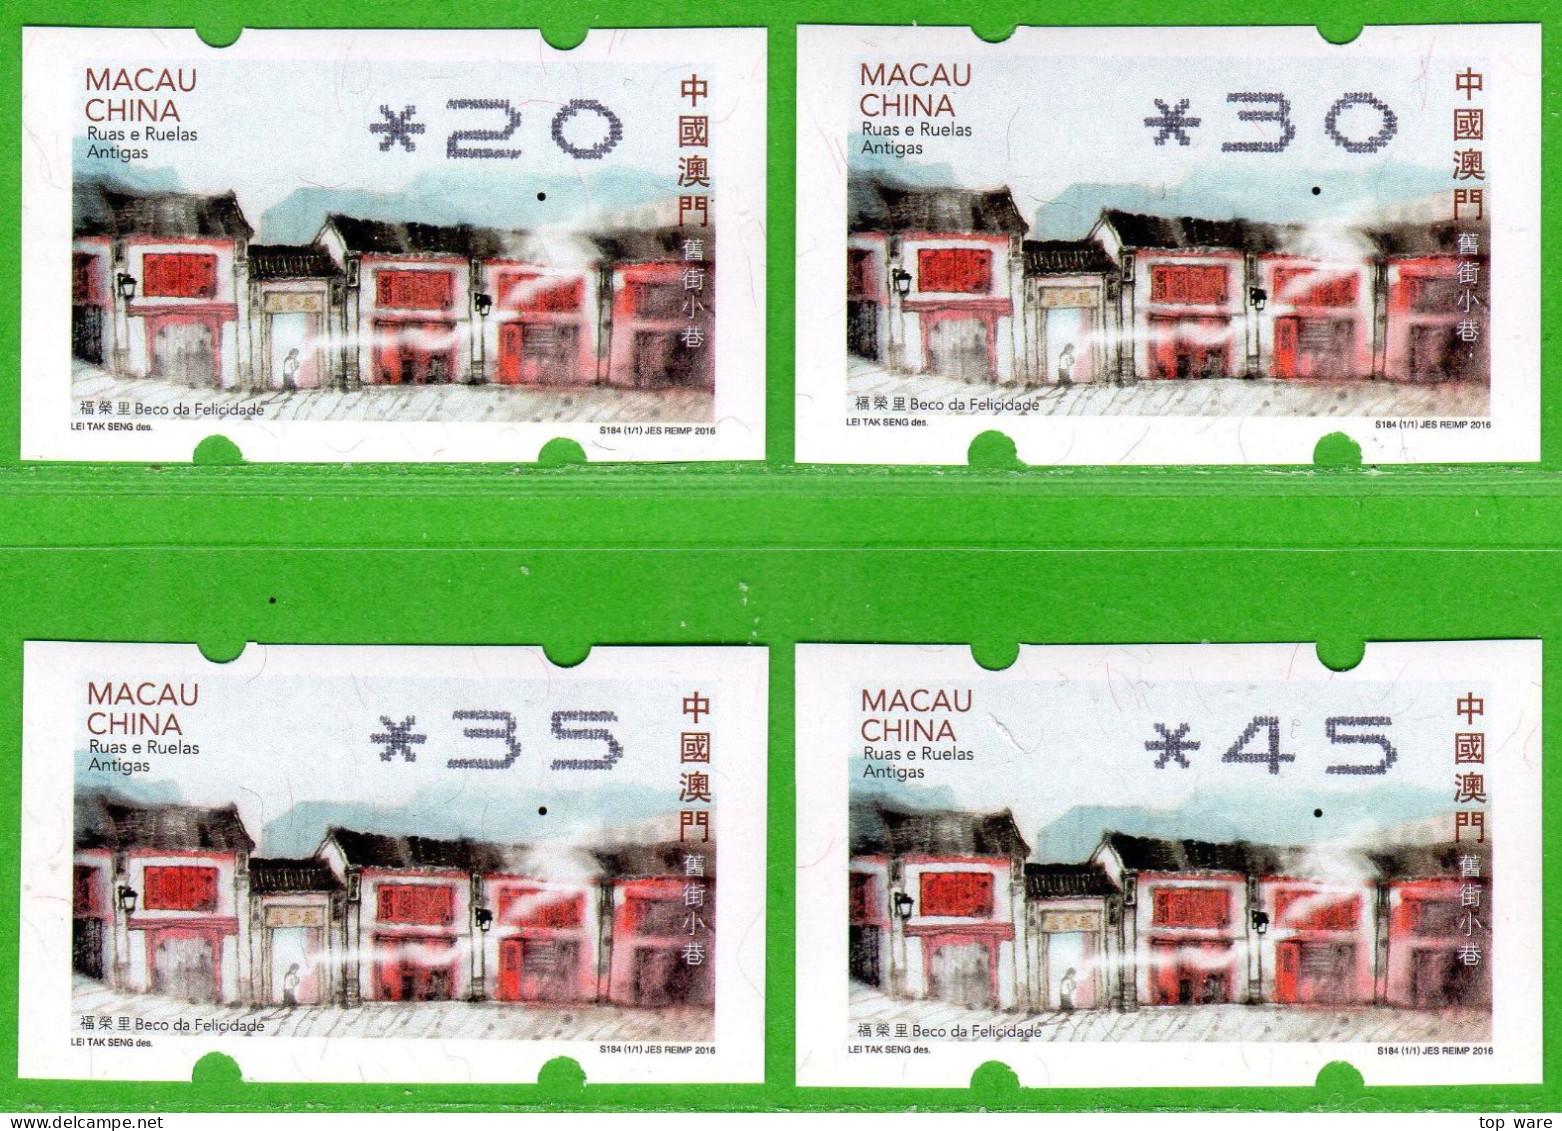 2018 China Macau ATM Stamps Old Streets And Alleys REPRINT 2016 / Satz 4 Werte MNH + AQ / Newvision Automatenmarken - Distributors